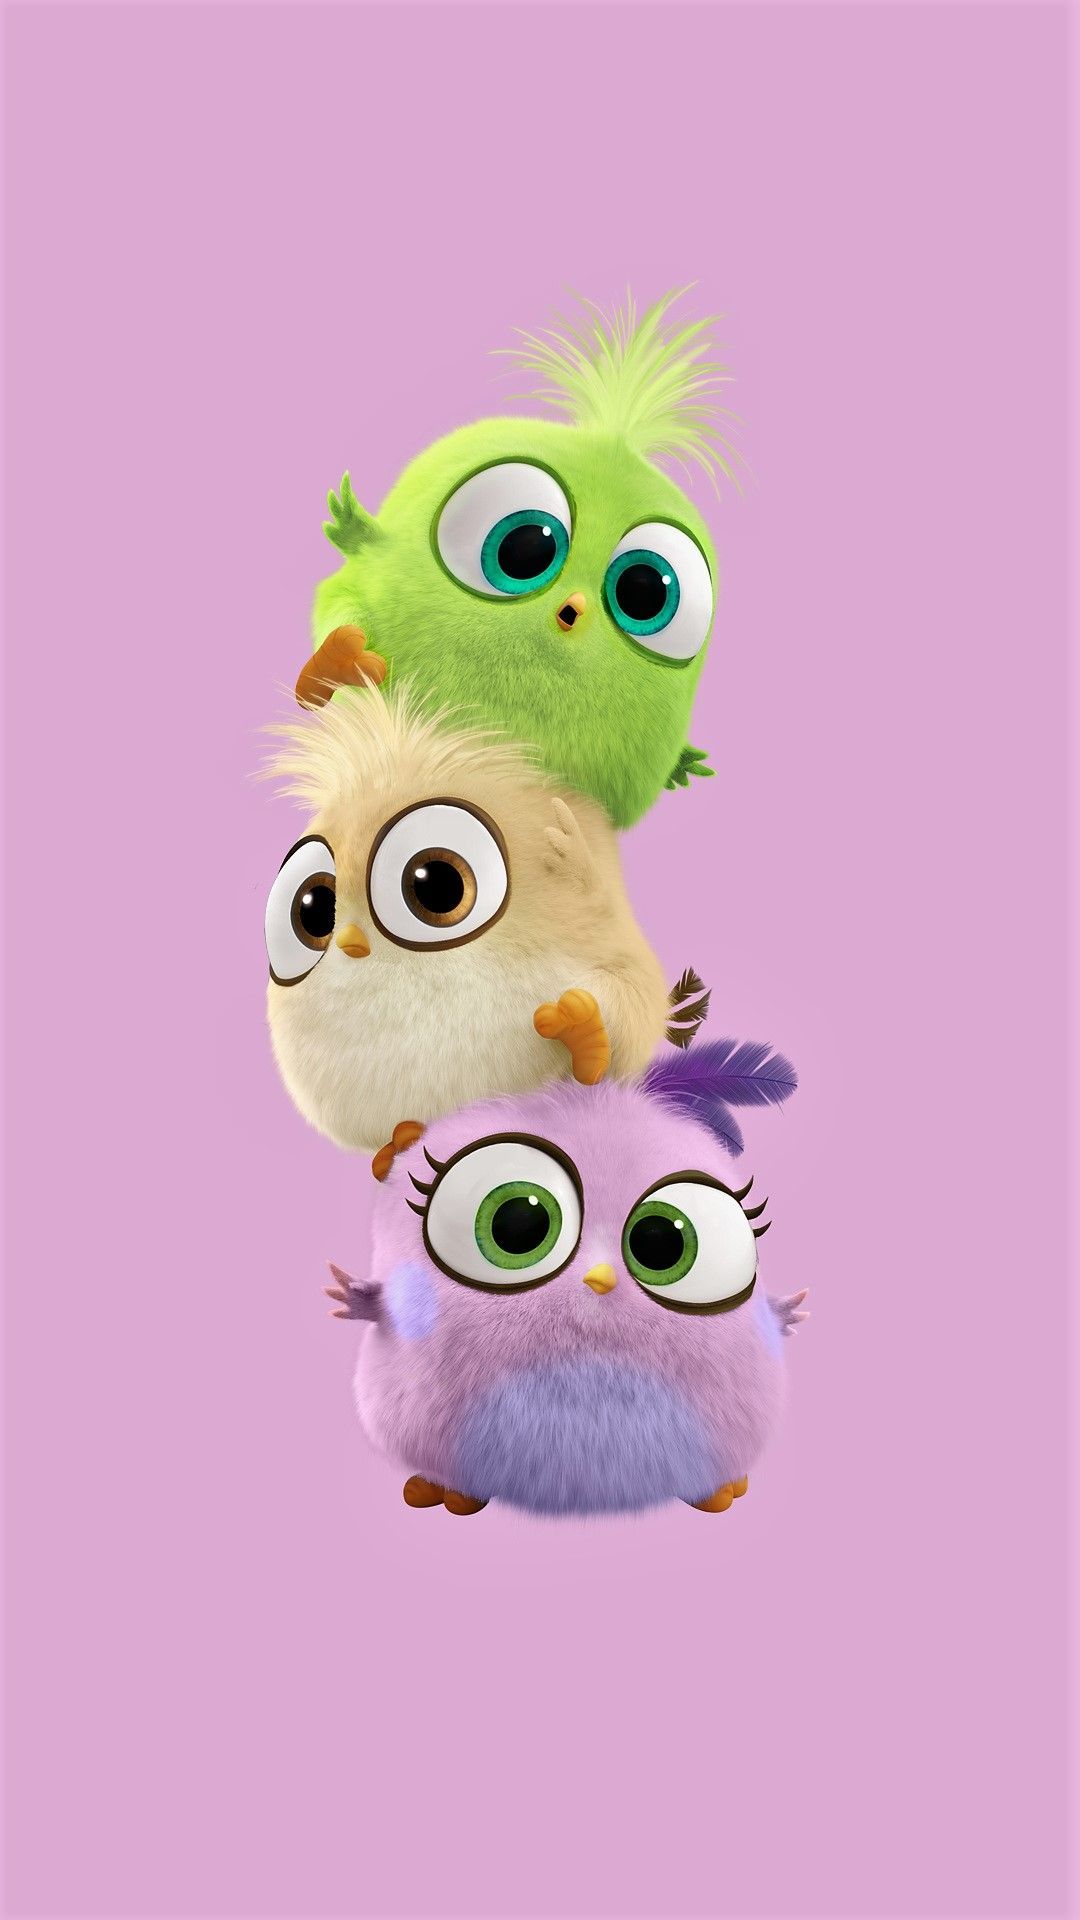 Cartoon Cute Mobile Wallpaper Background Wallpaper Image For Free Download  - Pngtree